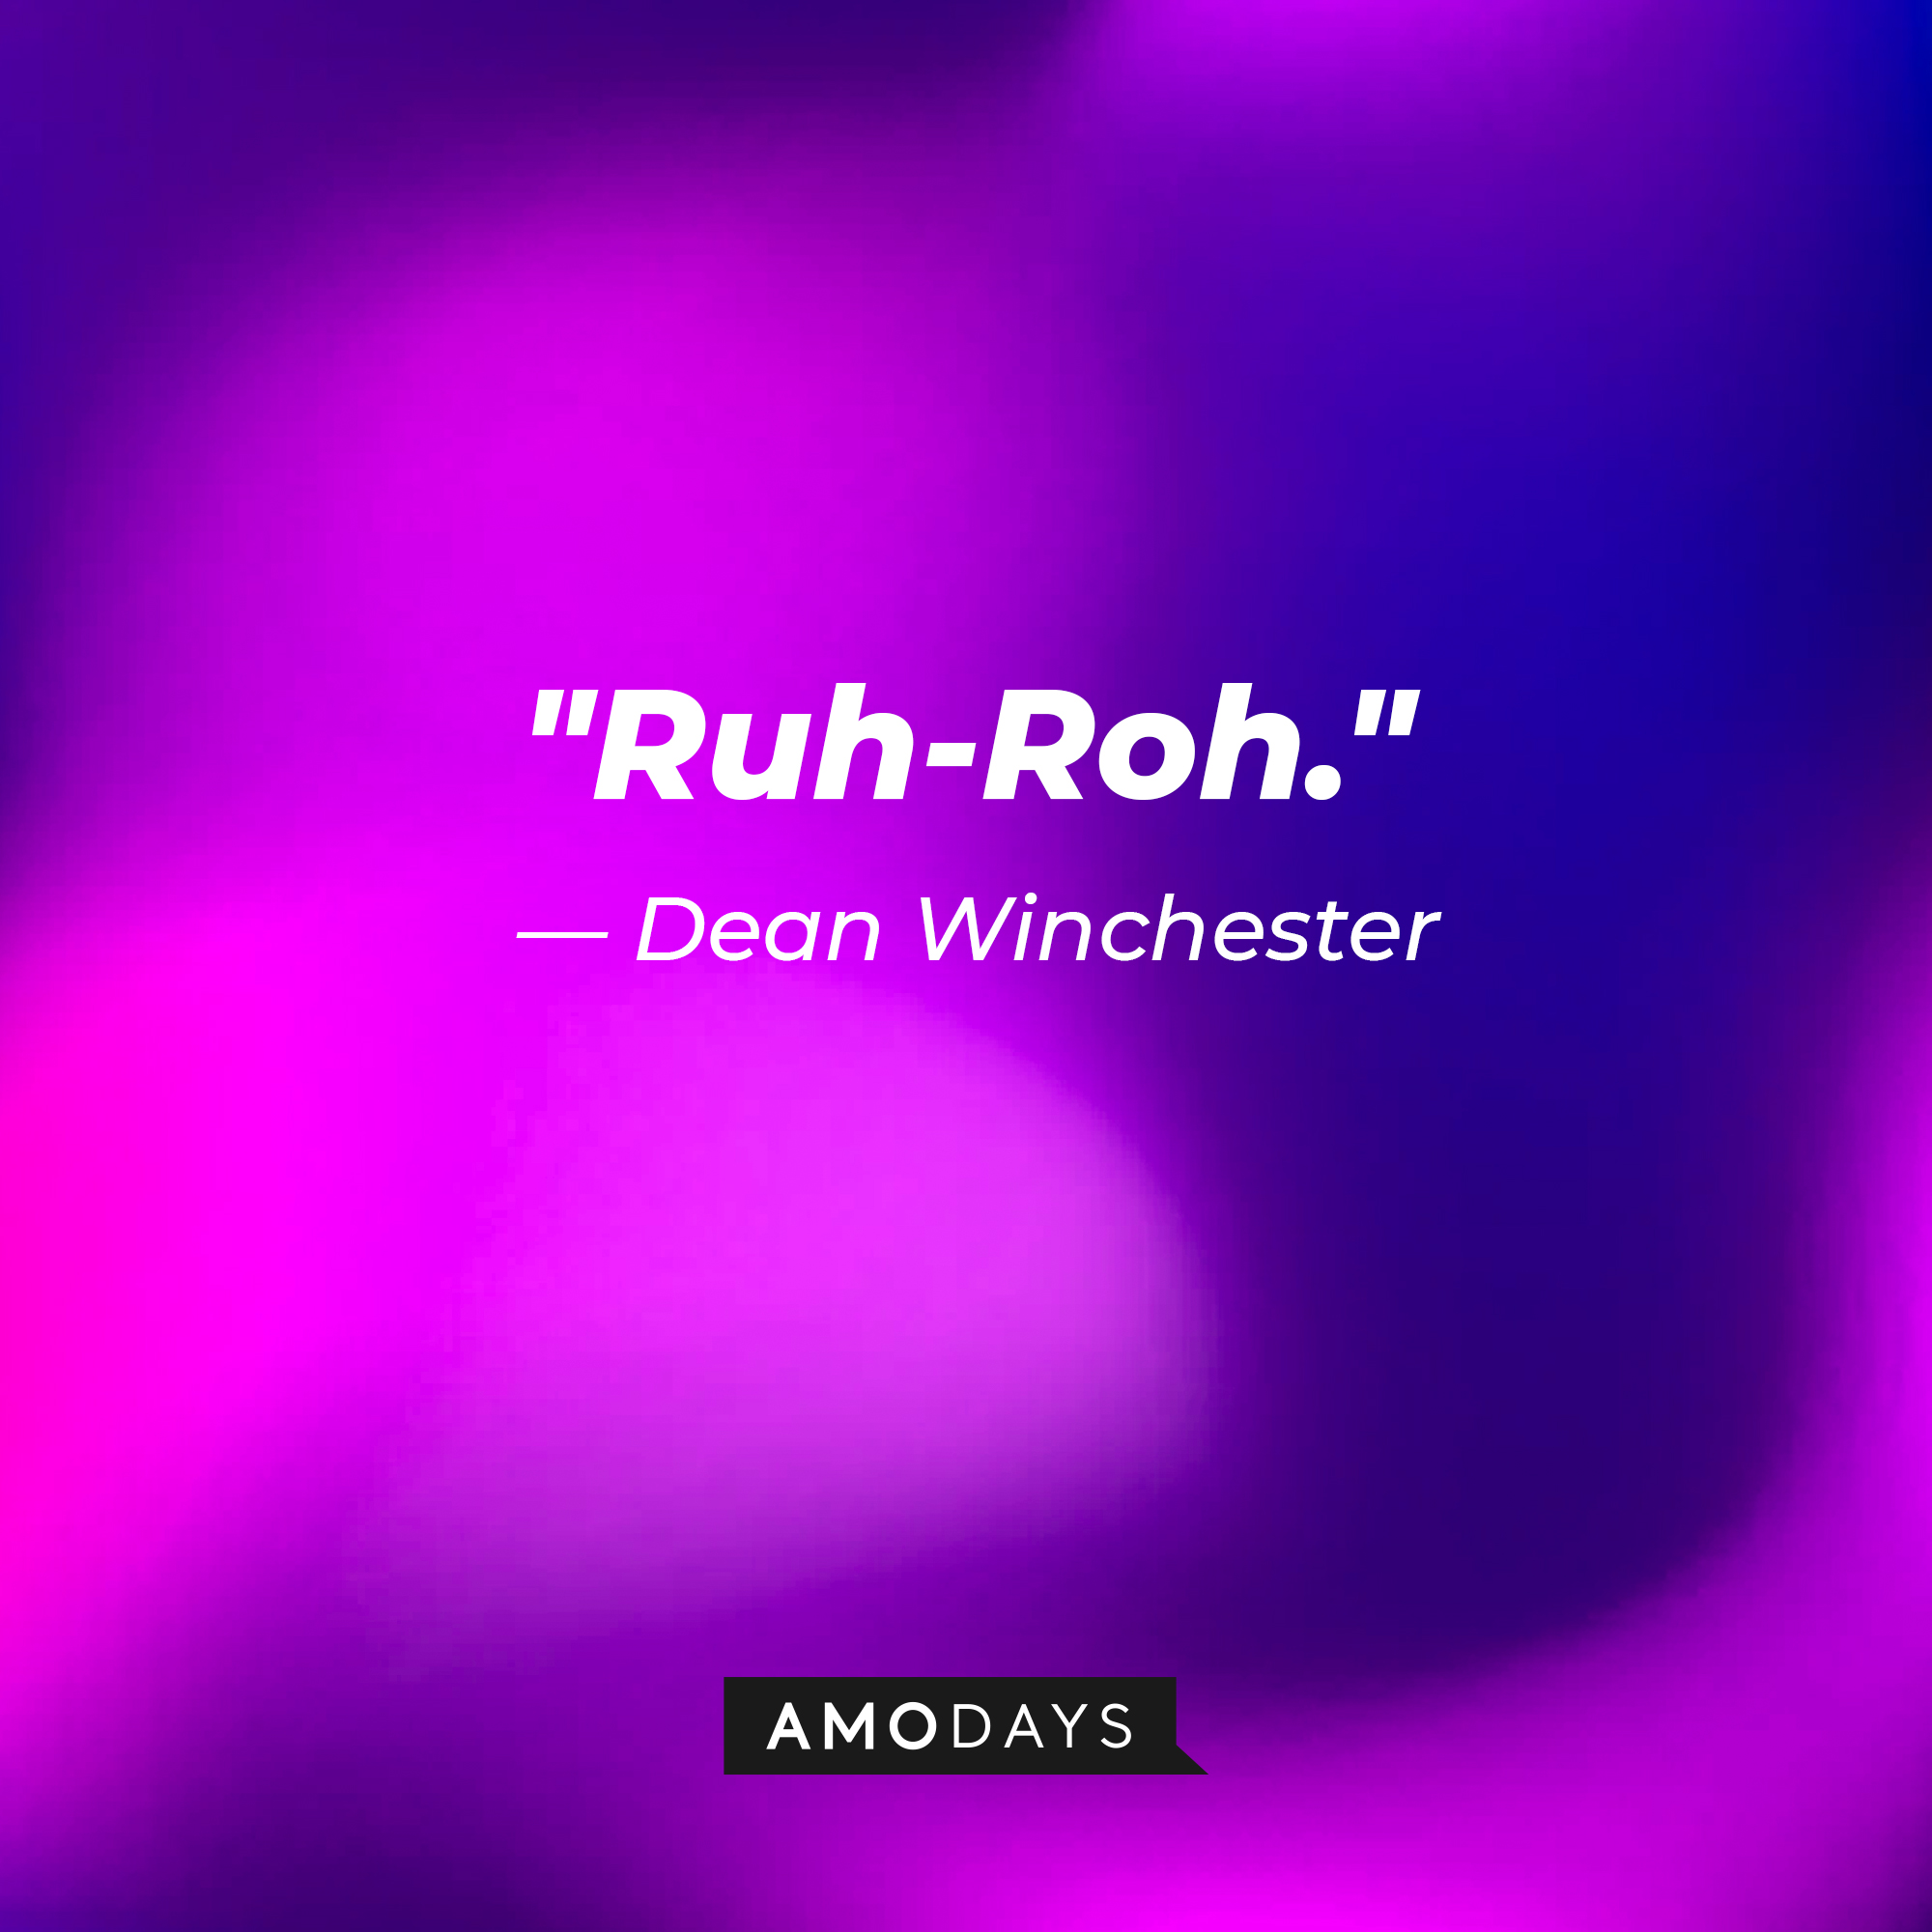 Dean Winchester's quote, "Ruh-Roh." | Source: Amodays